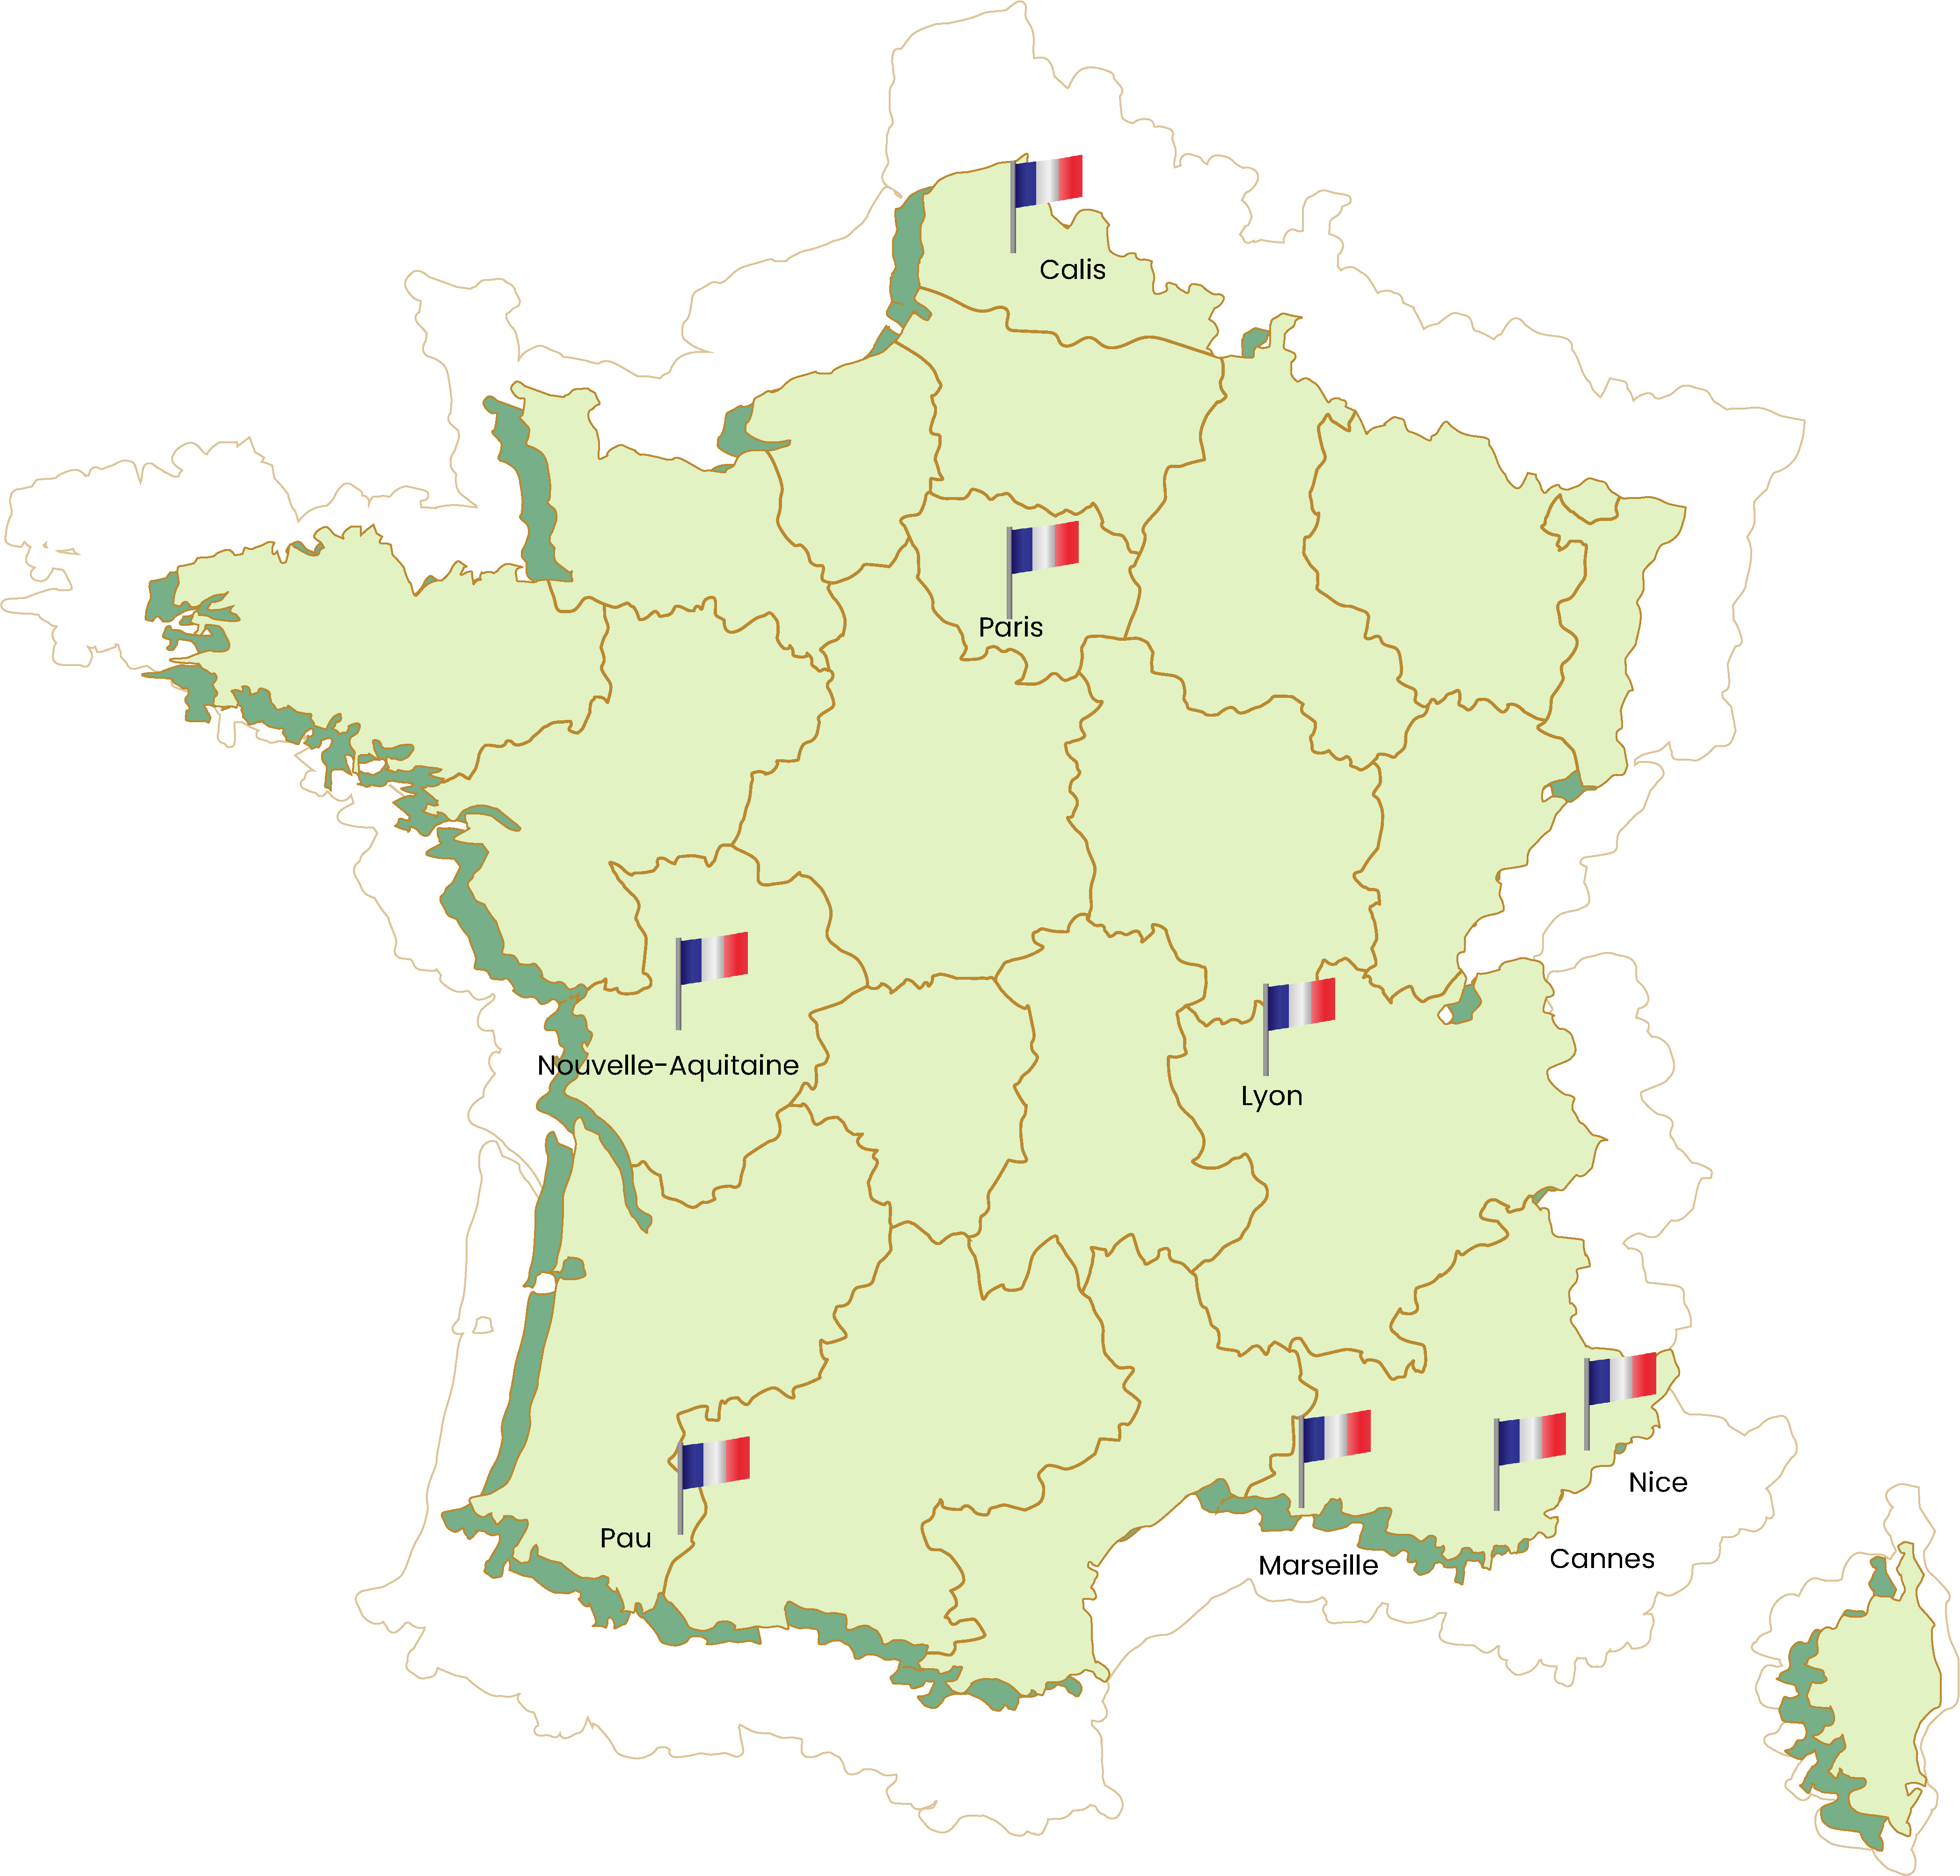 A map of France.